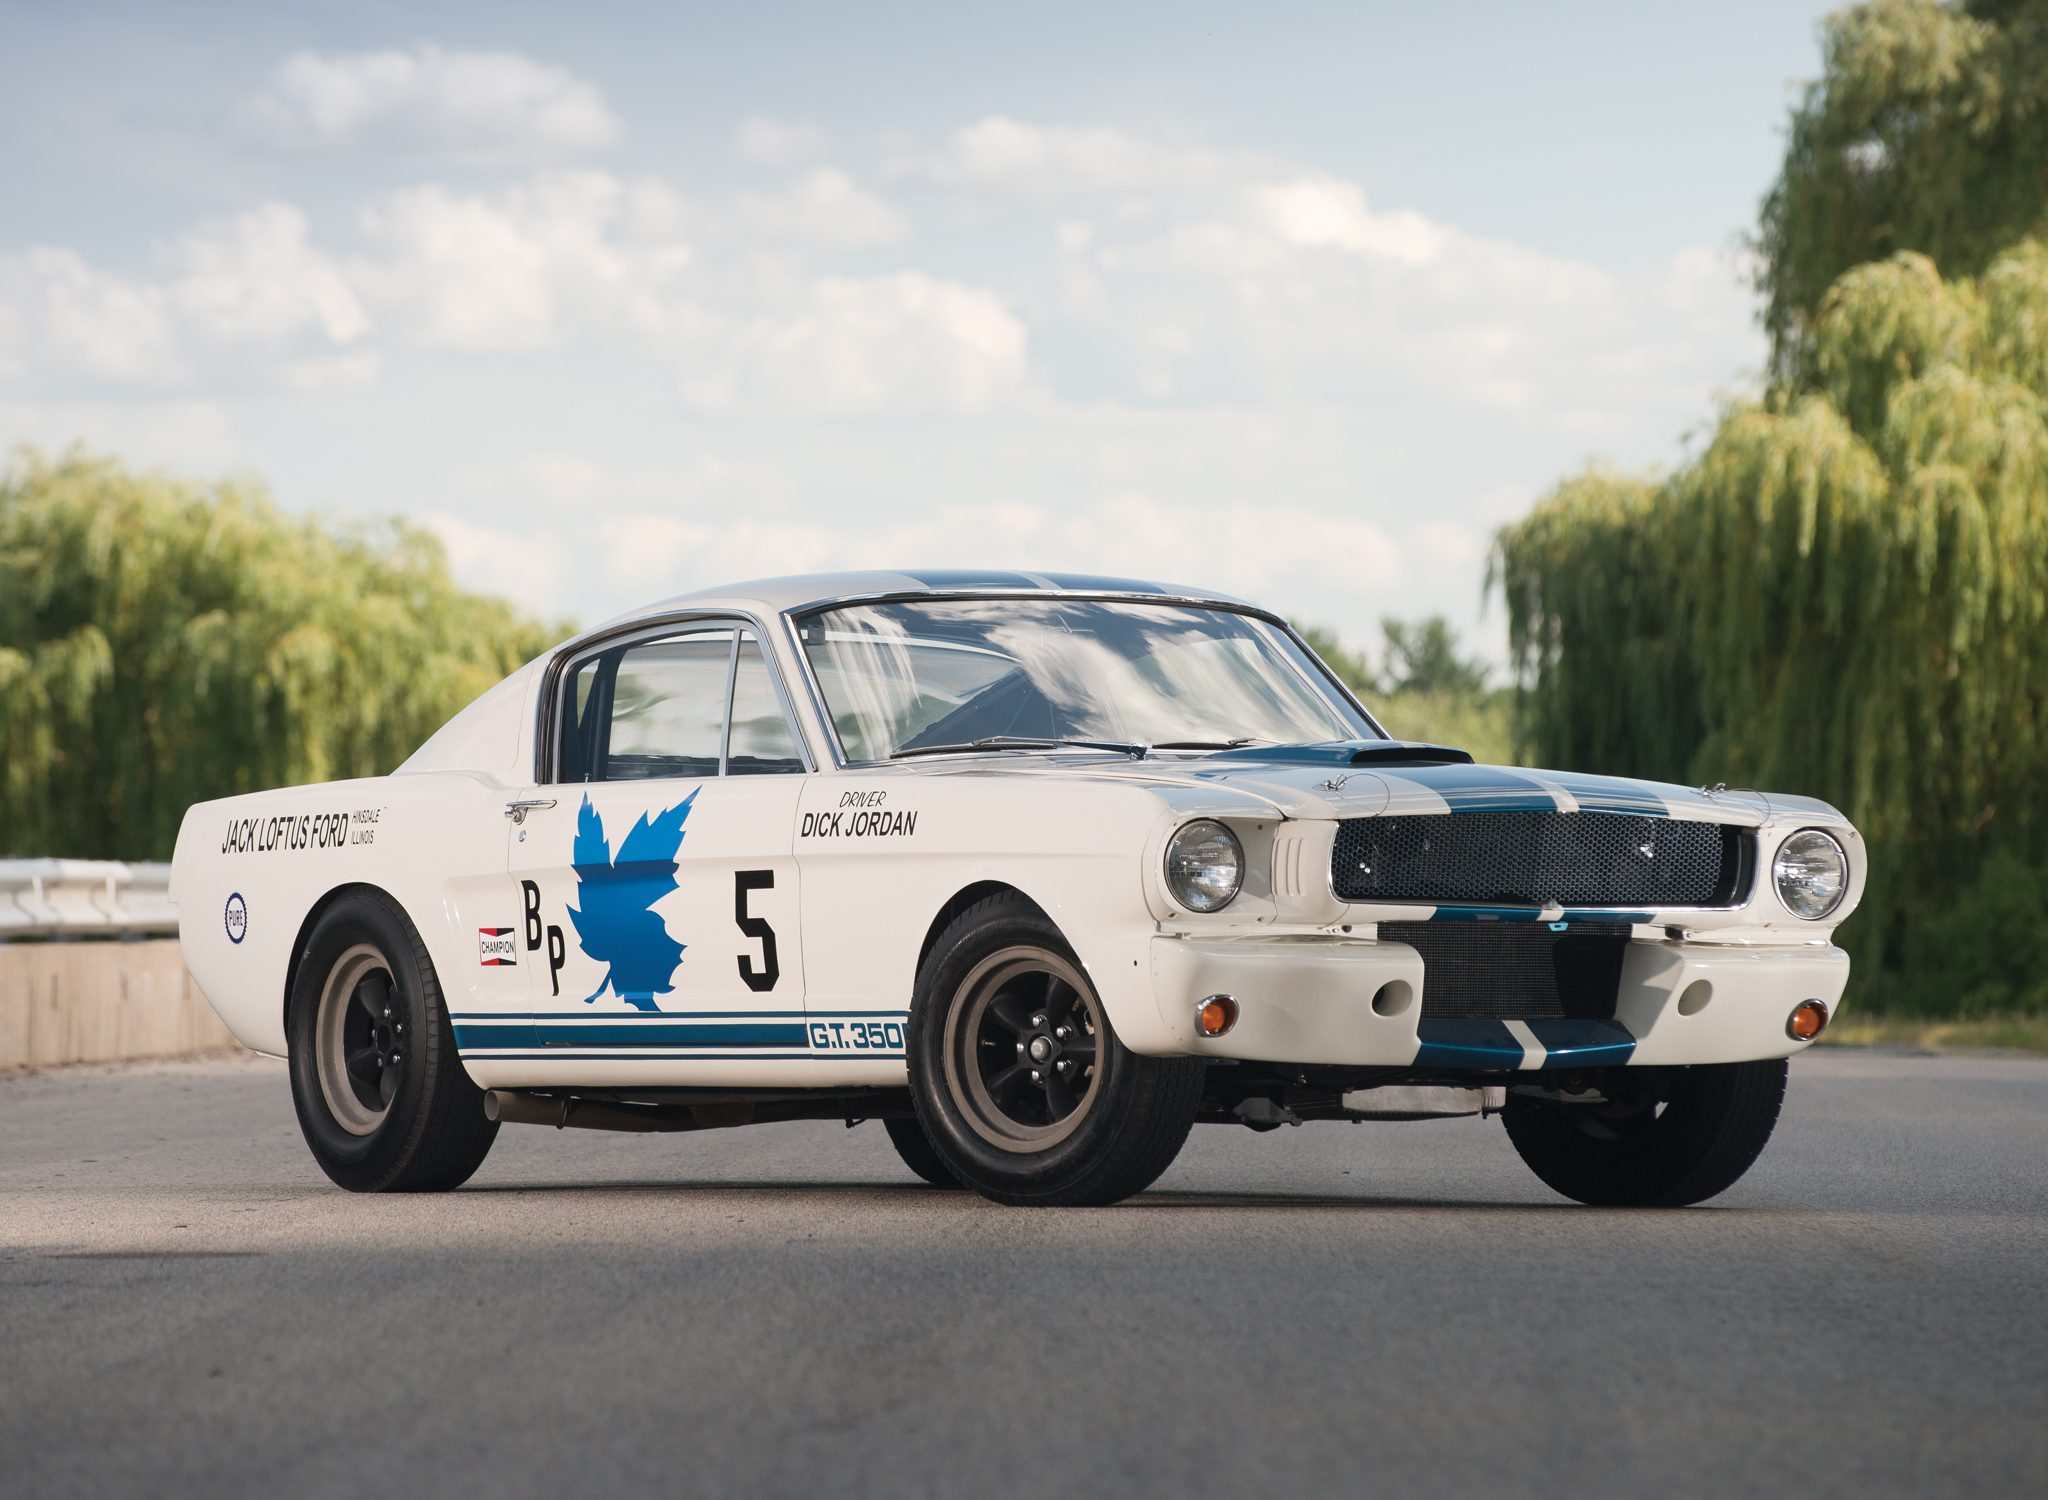 Mustang Of The Day: 1965 Shelby Mustang GT350R